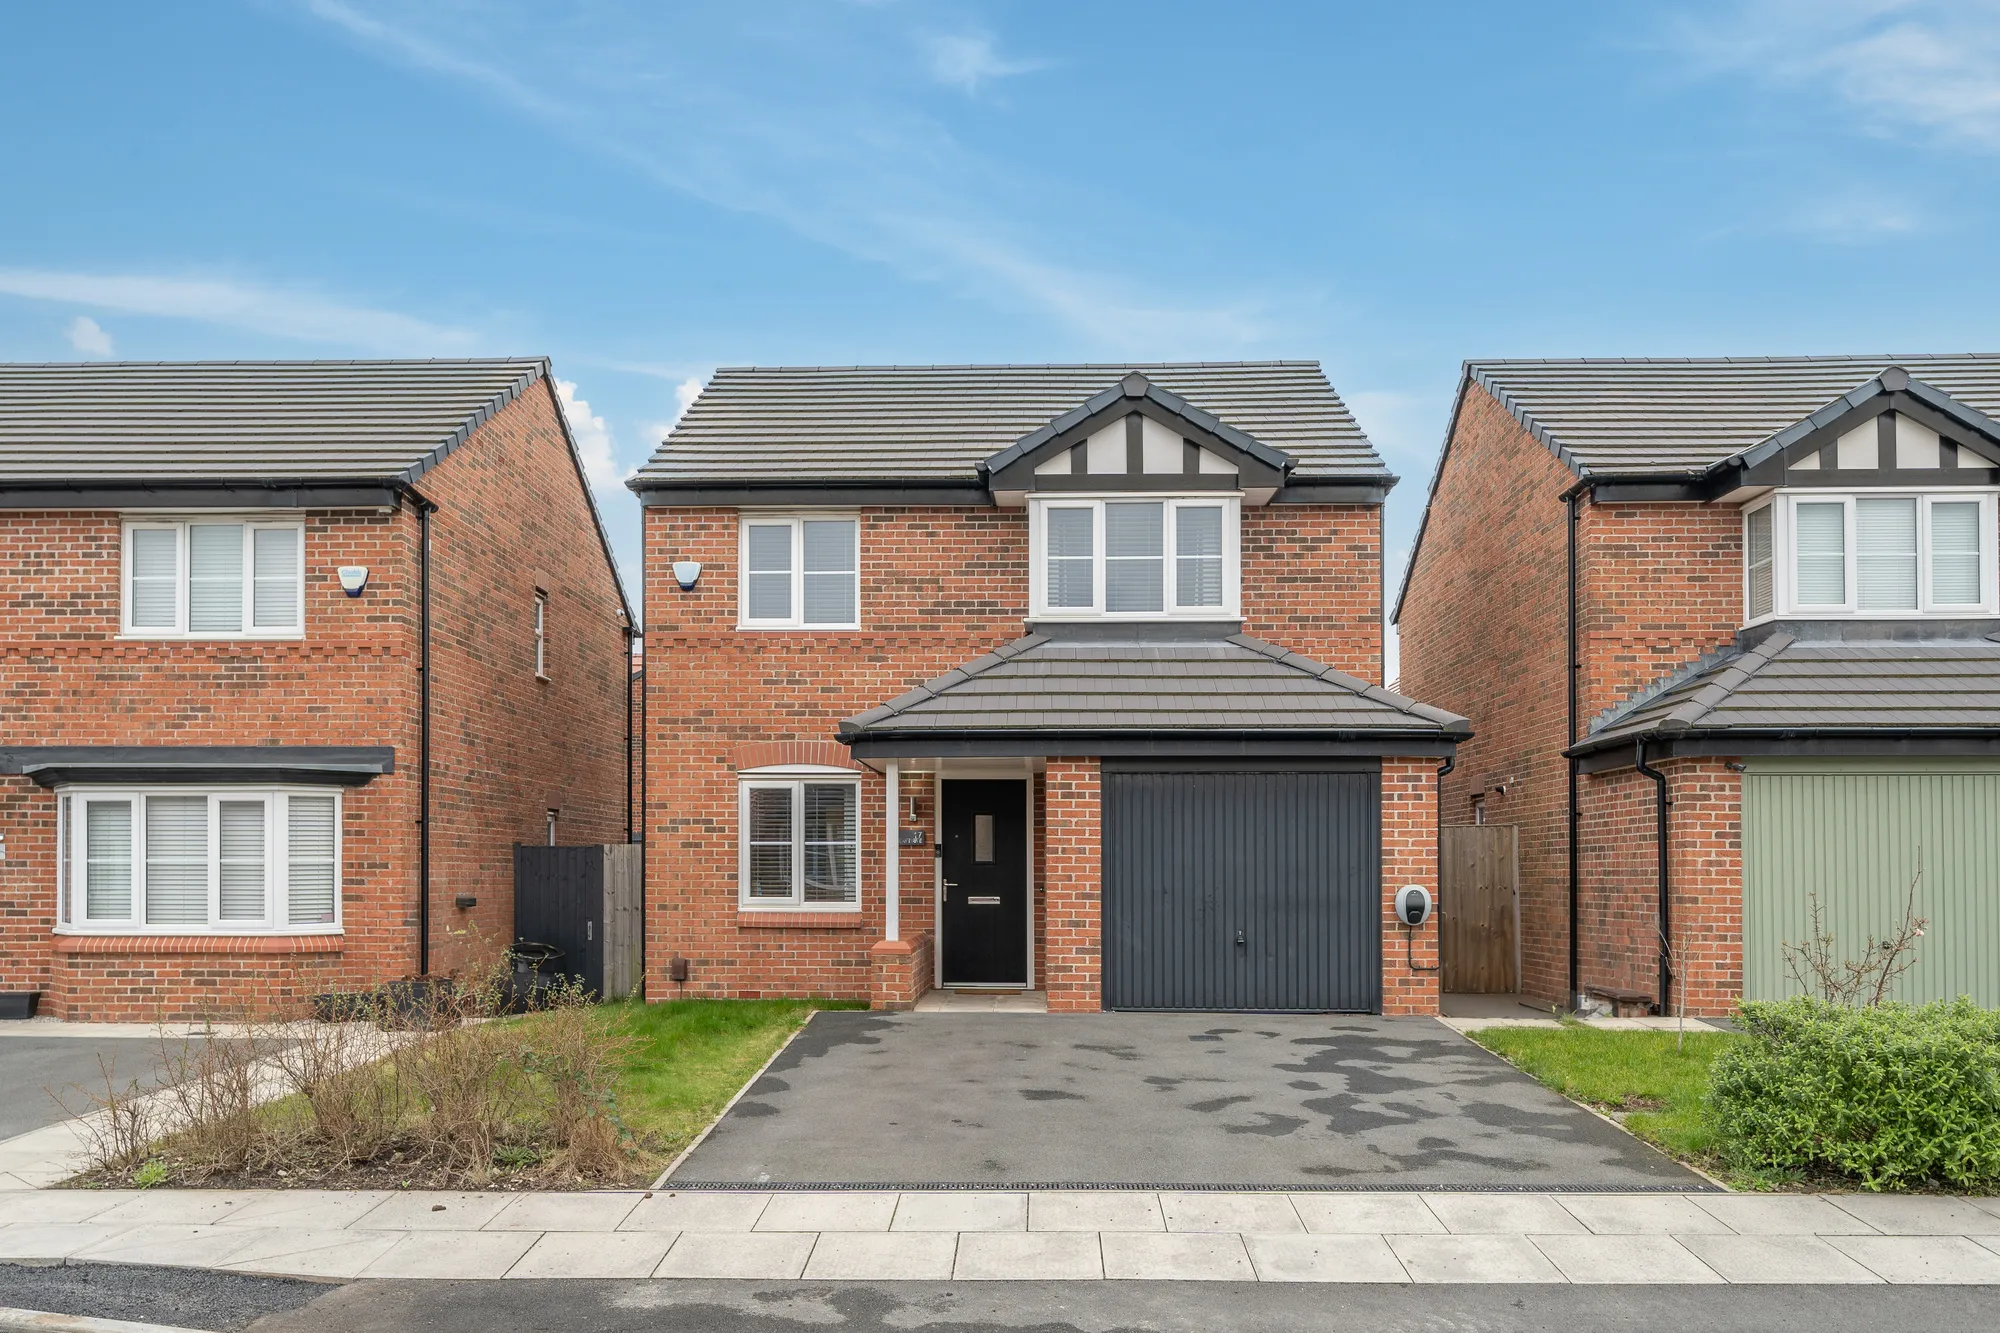 Captivating modern 3-bed detached home with open-plan kitchen, chic dressing room, utility room, integral garage, and NHBC guarantee until 2030. Enclosed garden, driveway with EV point. No chain.